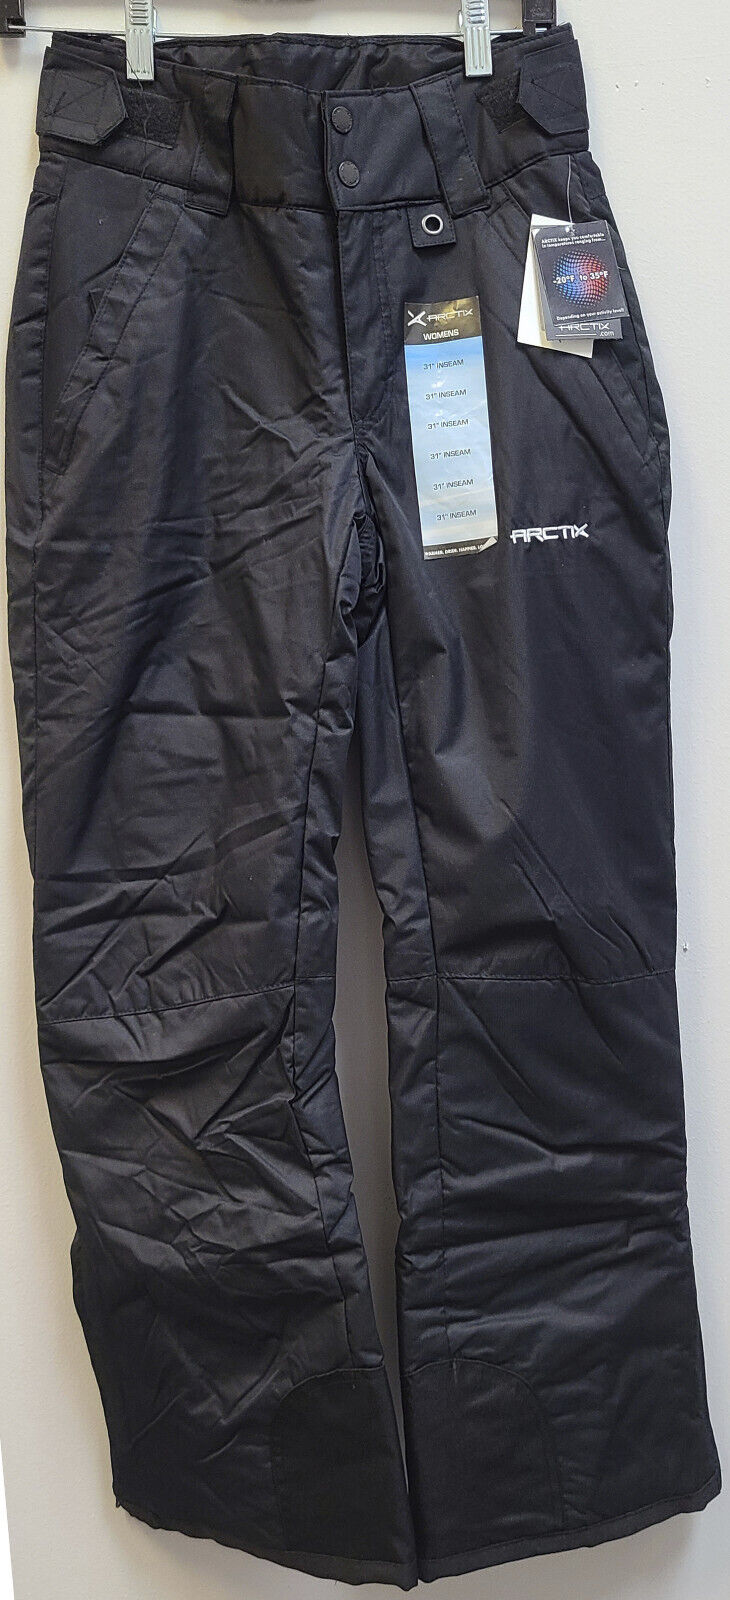 https://calebstreasures.com/wp-content/uploads/imported/1/ARCTIX-Womens-INSULATED-SNOW-PANTS-Size-XS-0-2-Inseam-31-Protects-20F-to-35F-203972966381.jpg